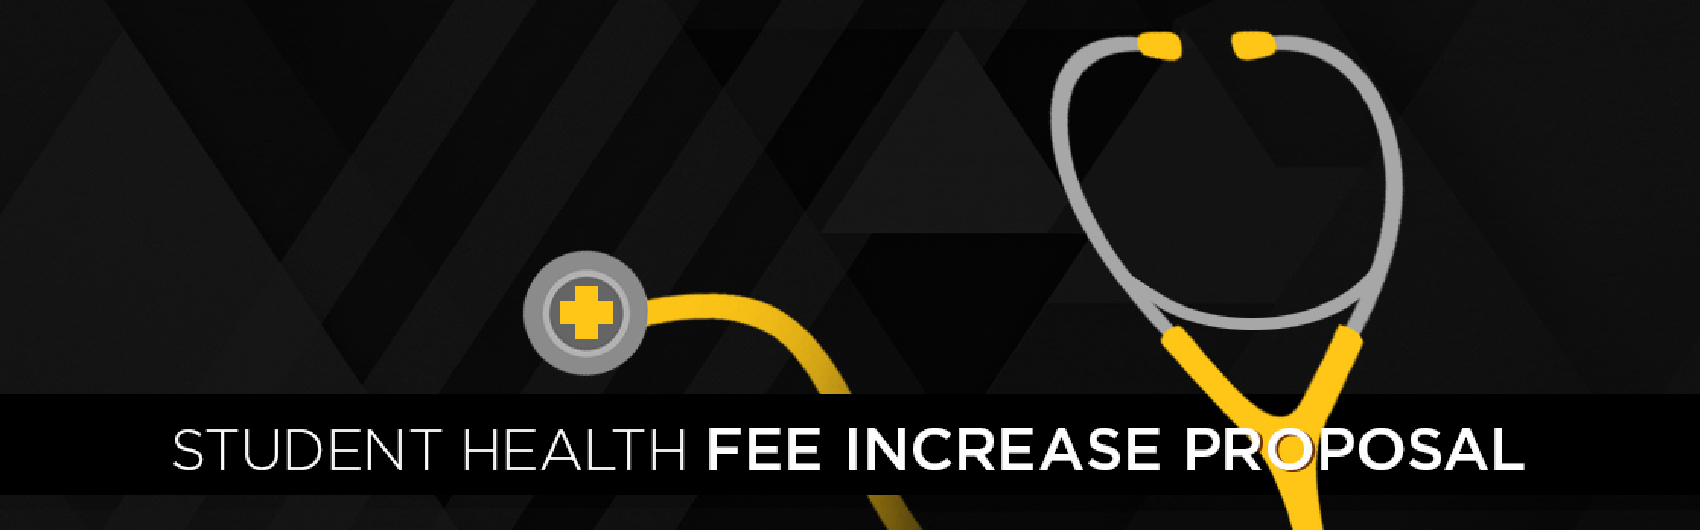 Student Health Fee Proposal Banner